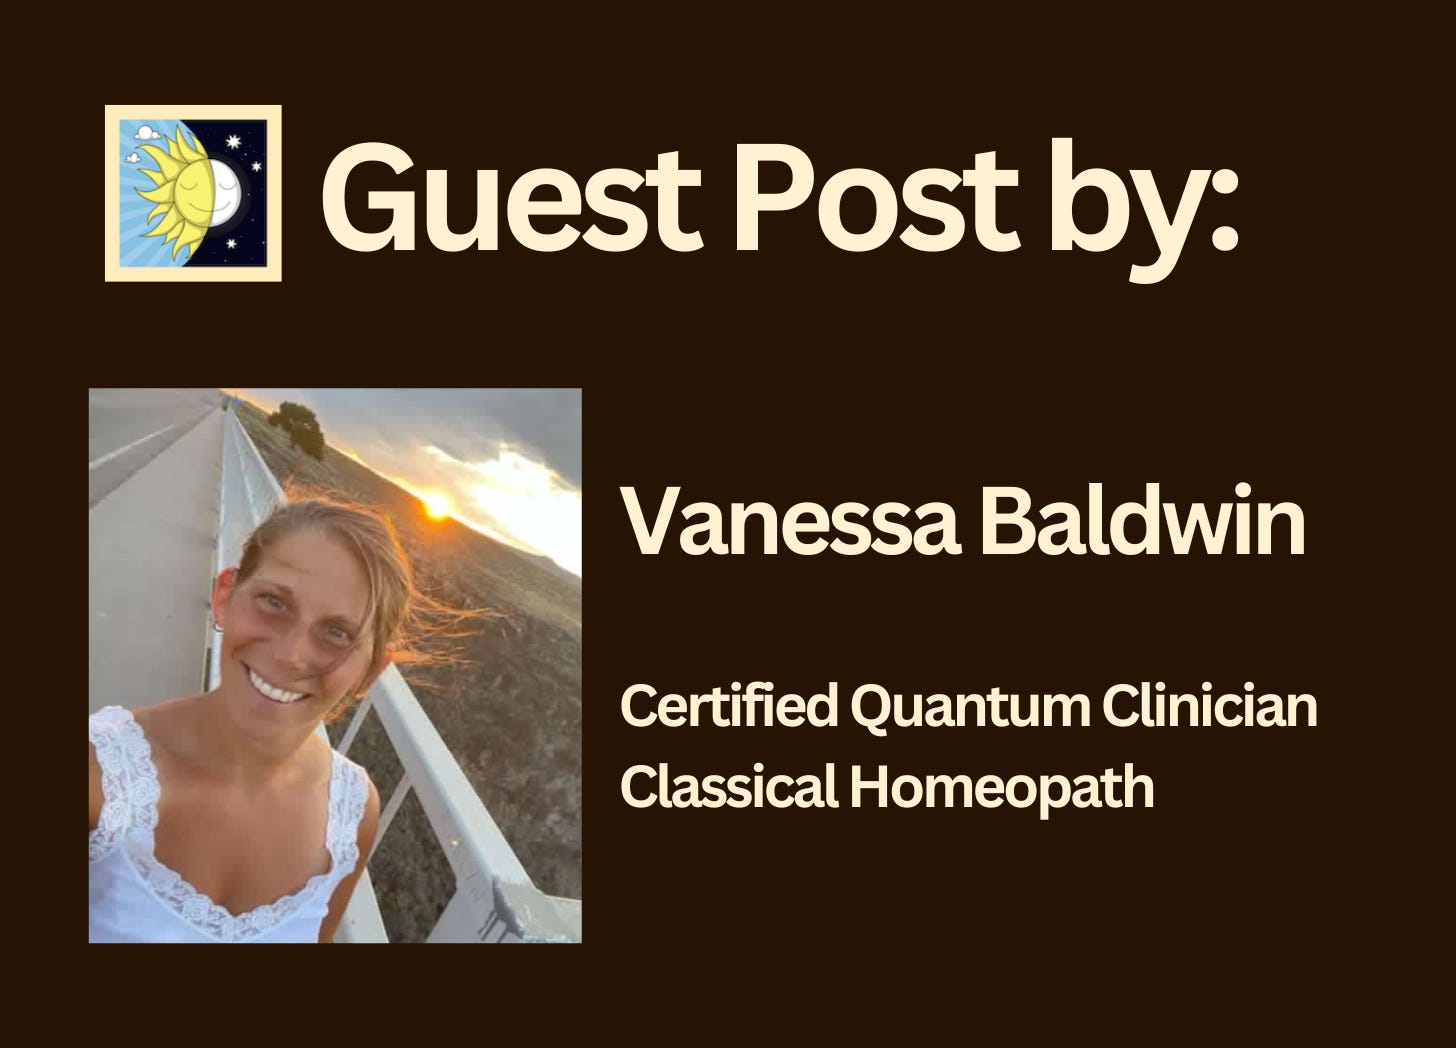 This guest post on Brighter Days, Darker Nights is from Vanessa Baldwin, Certified Quantum Clinician and Classical Homeopath